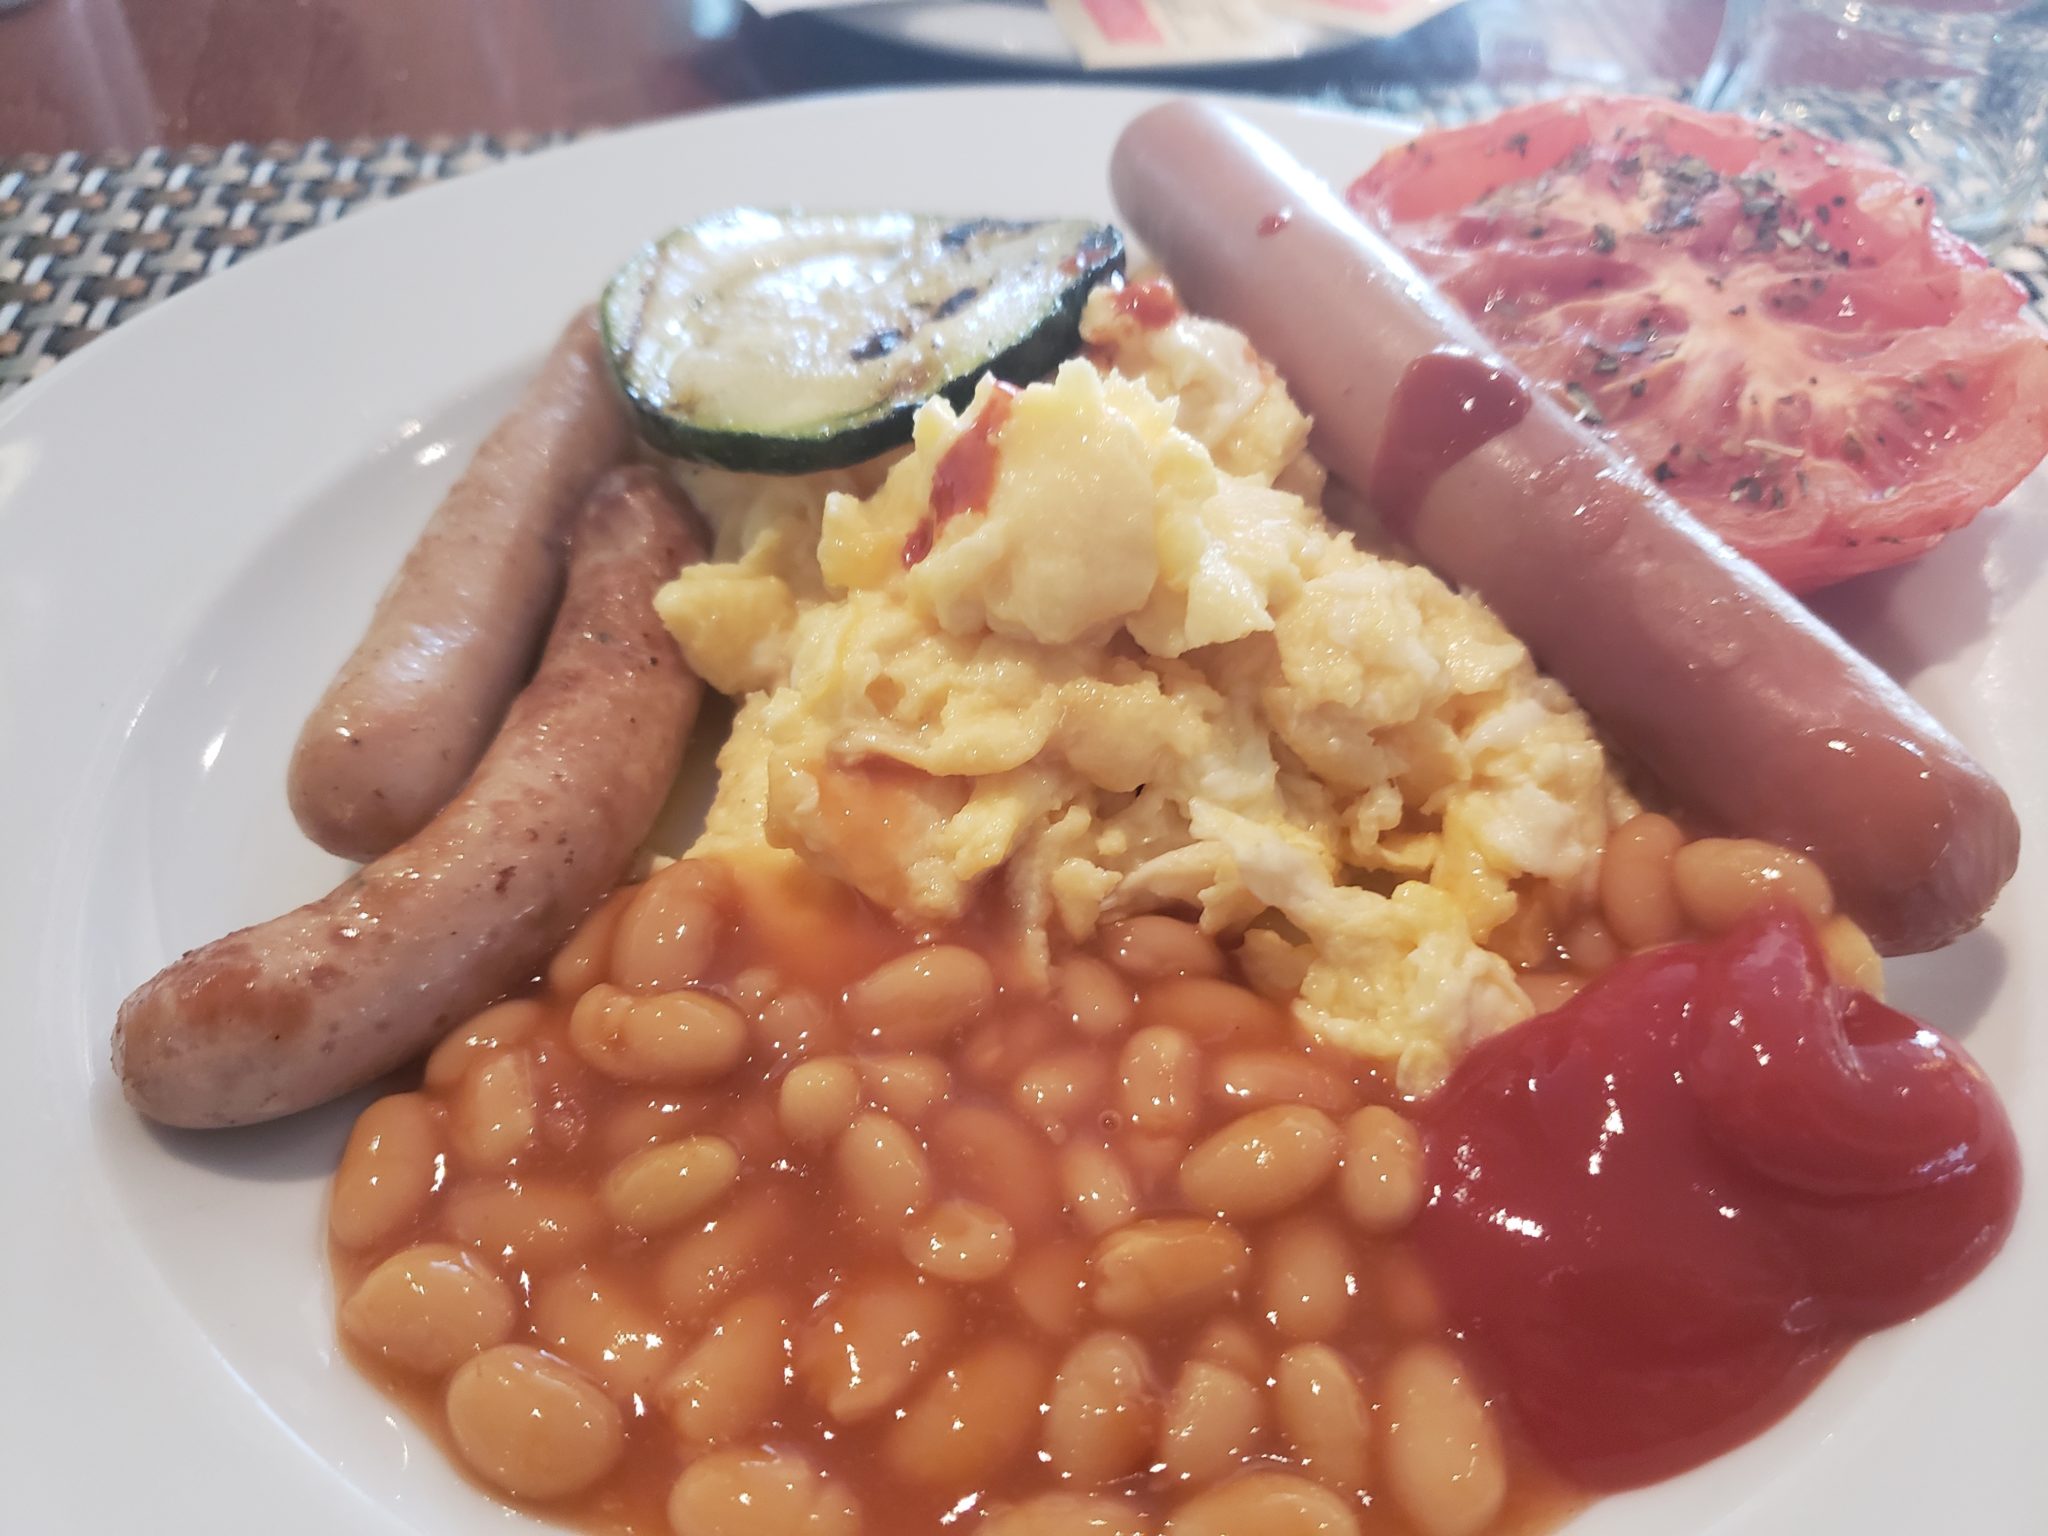 a plate of food with sausages beans and tomatoes